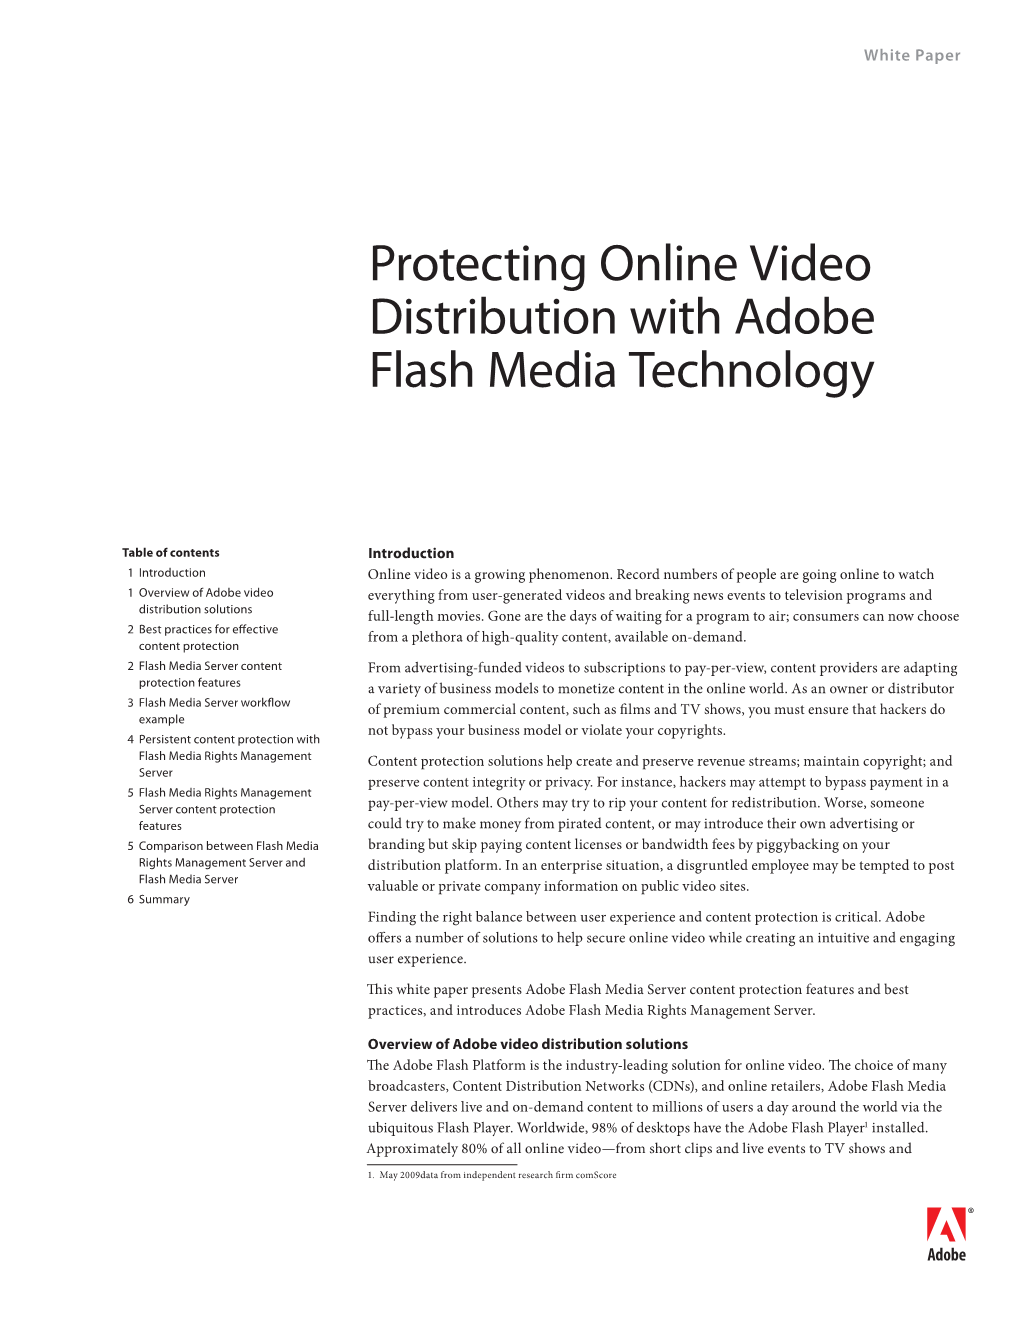 Protecting Online Video Distribution with Adobe Flash Media Technology